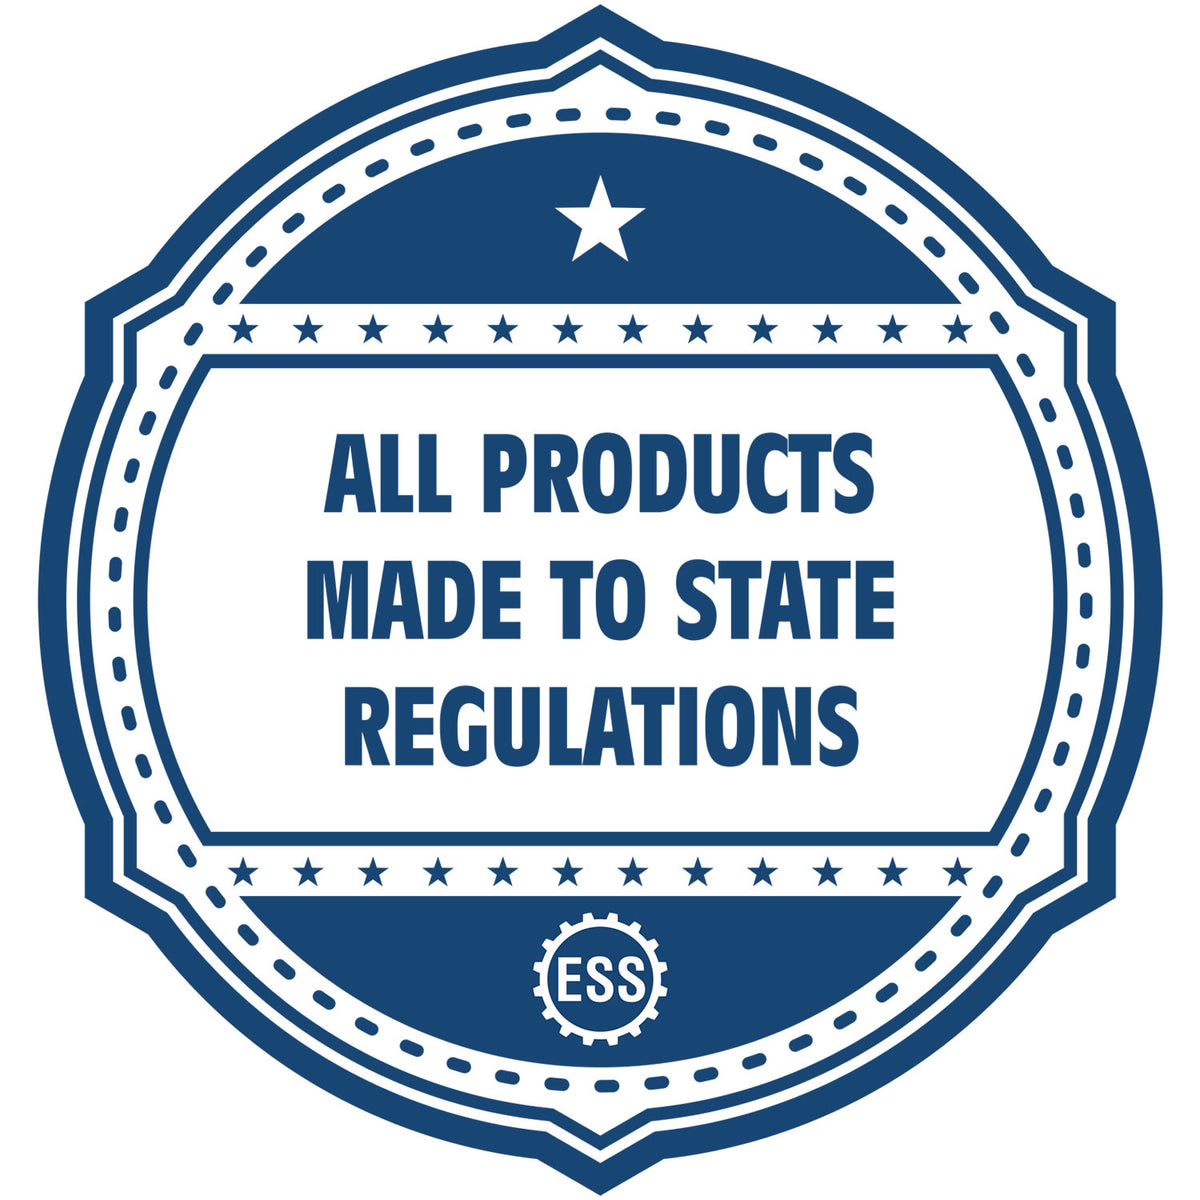 An icon or badge element for the Slim Pre-Inked Missouri Architect Seal Stamp showing that this product is made in compliance with state regulations.